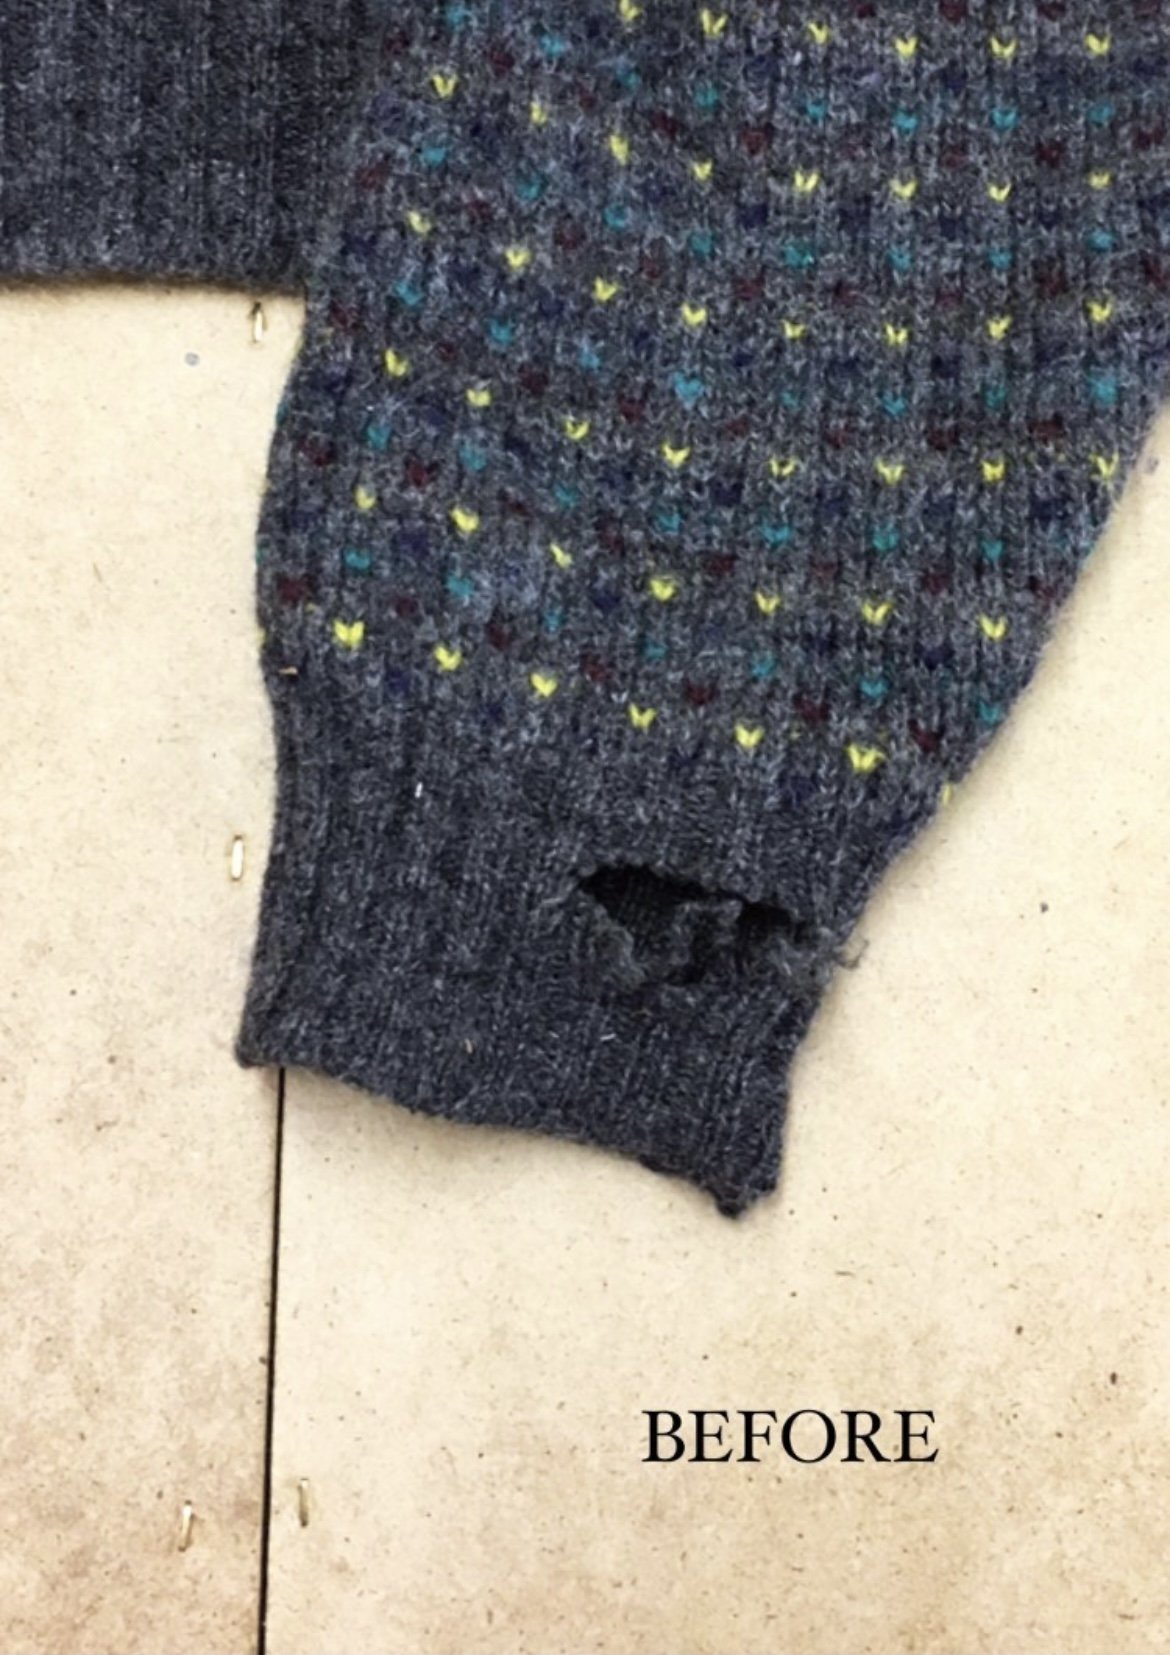 How to Mend Knits